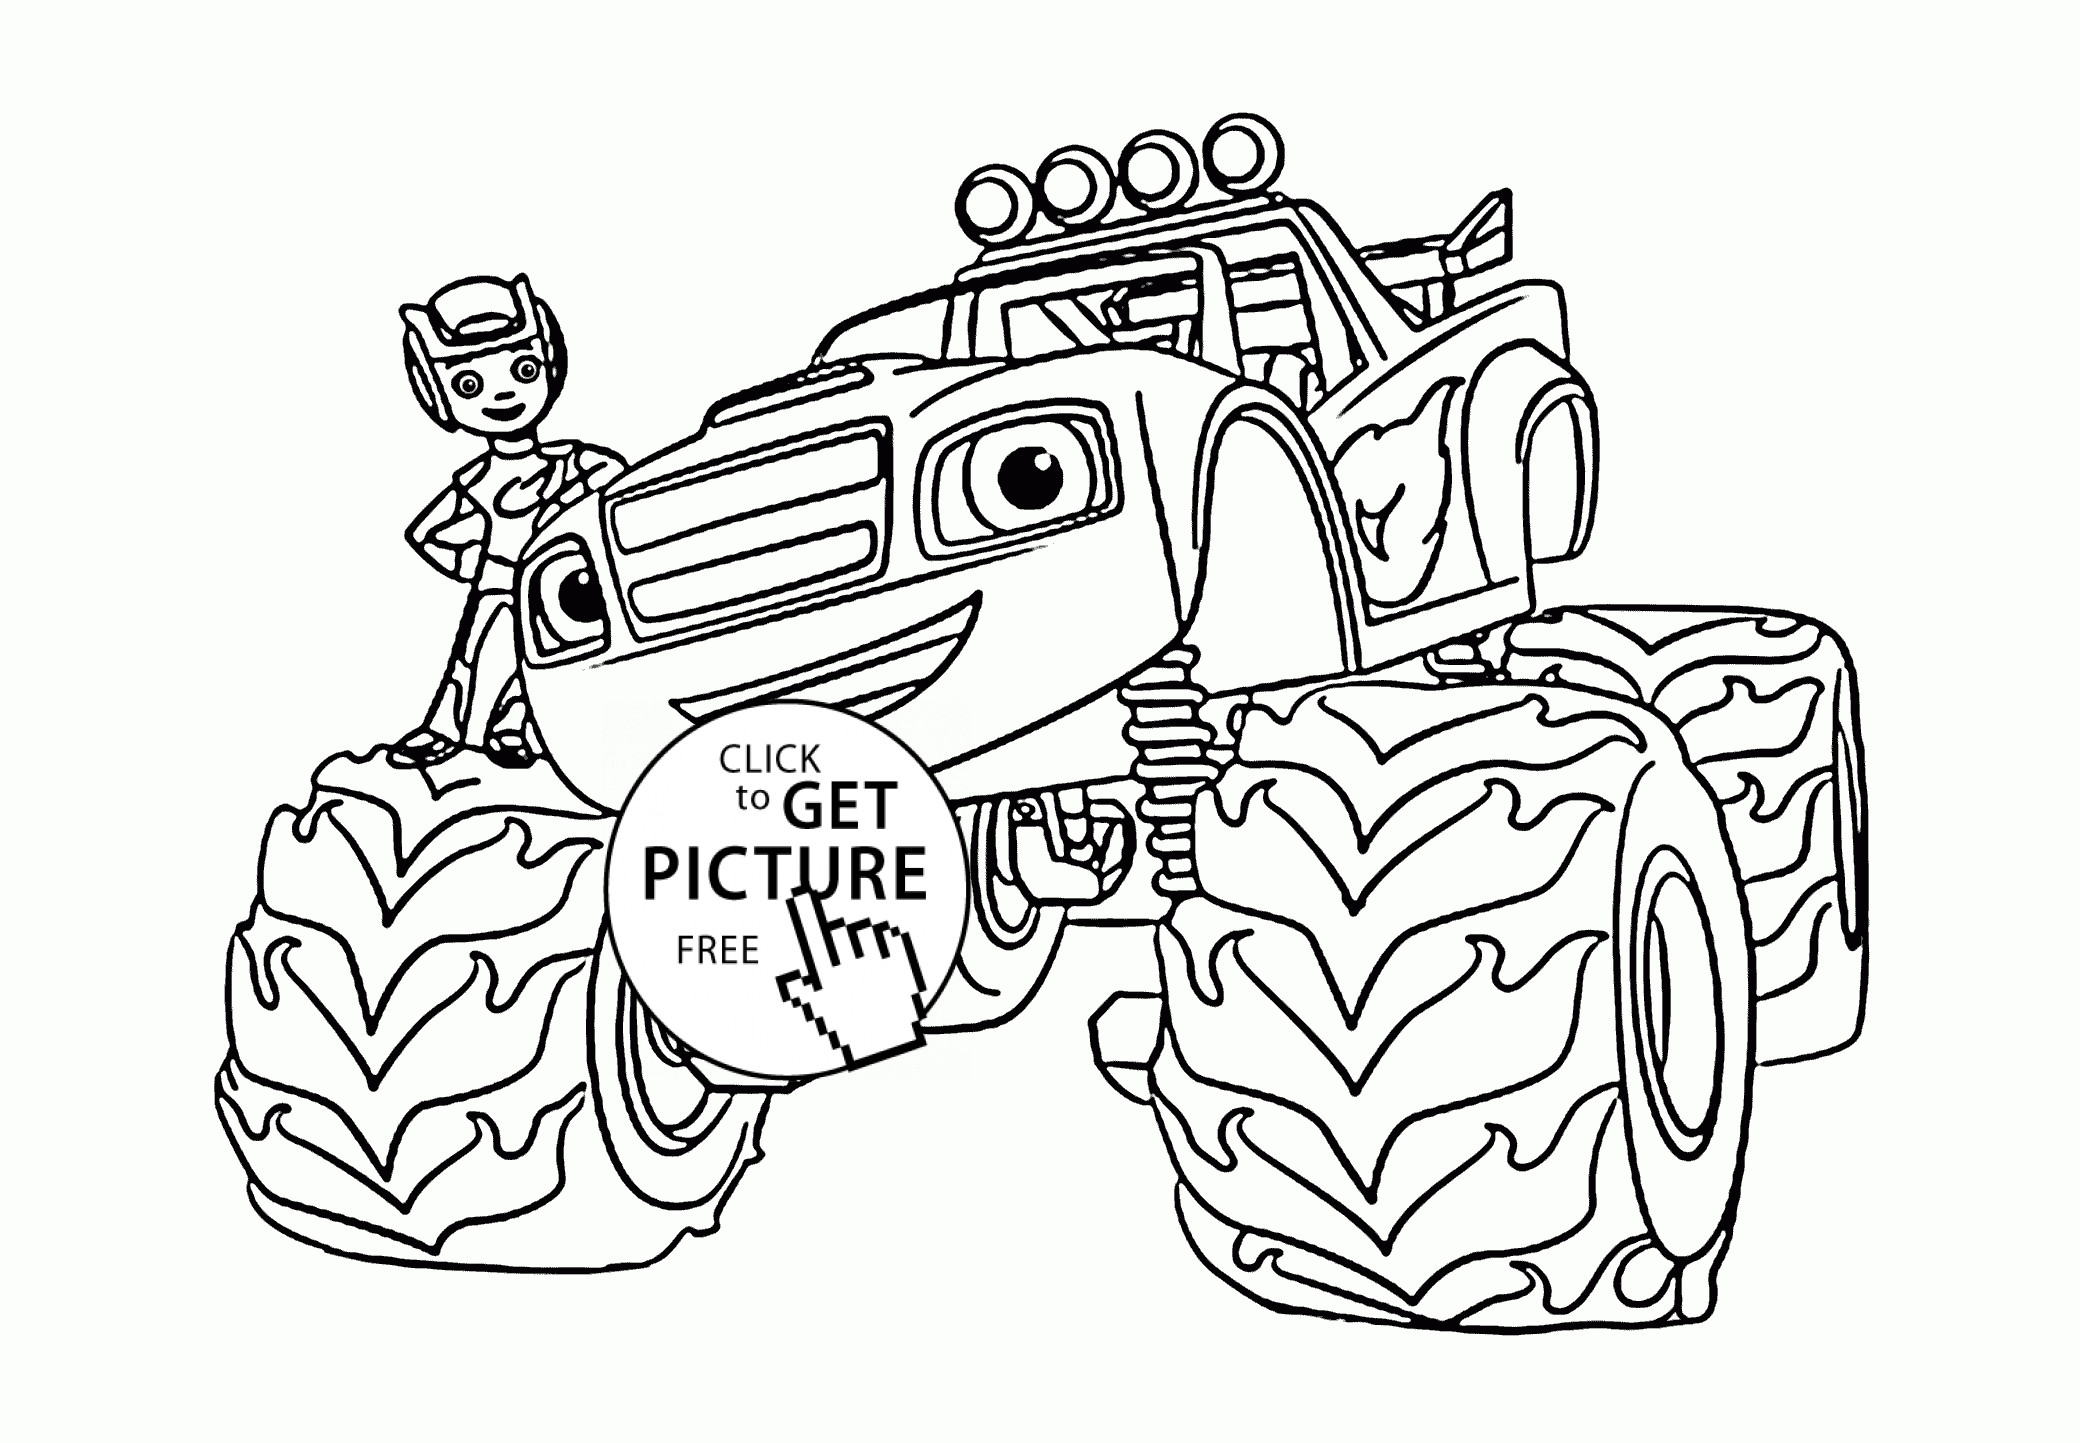 Printable Coloring Pages For Boys
 Blaze Monster Truck with Boy coloring page for kids